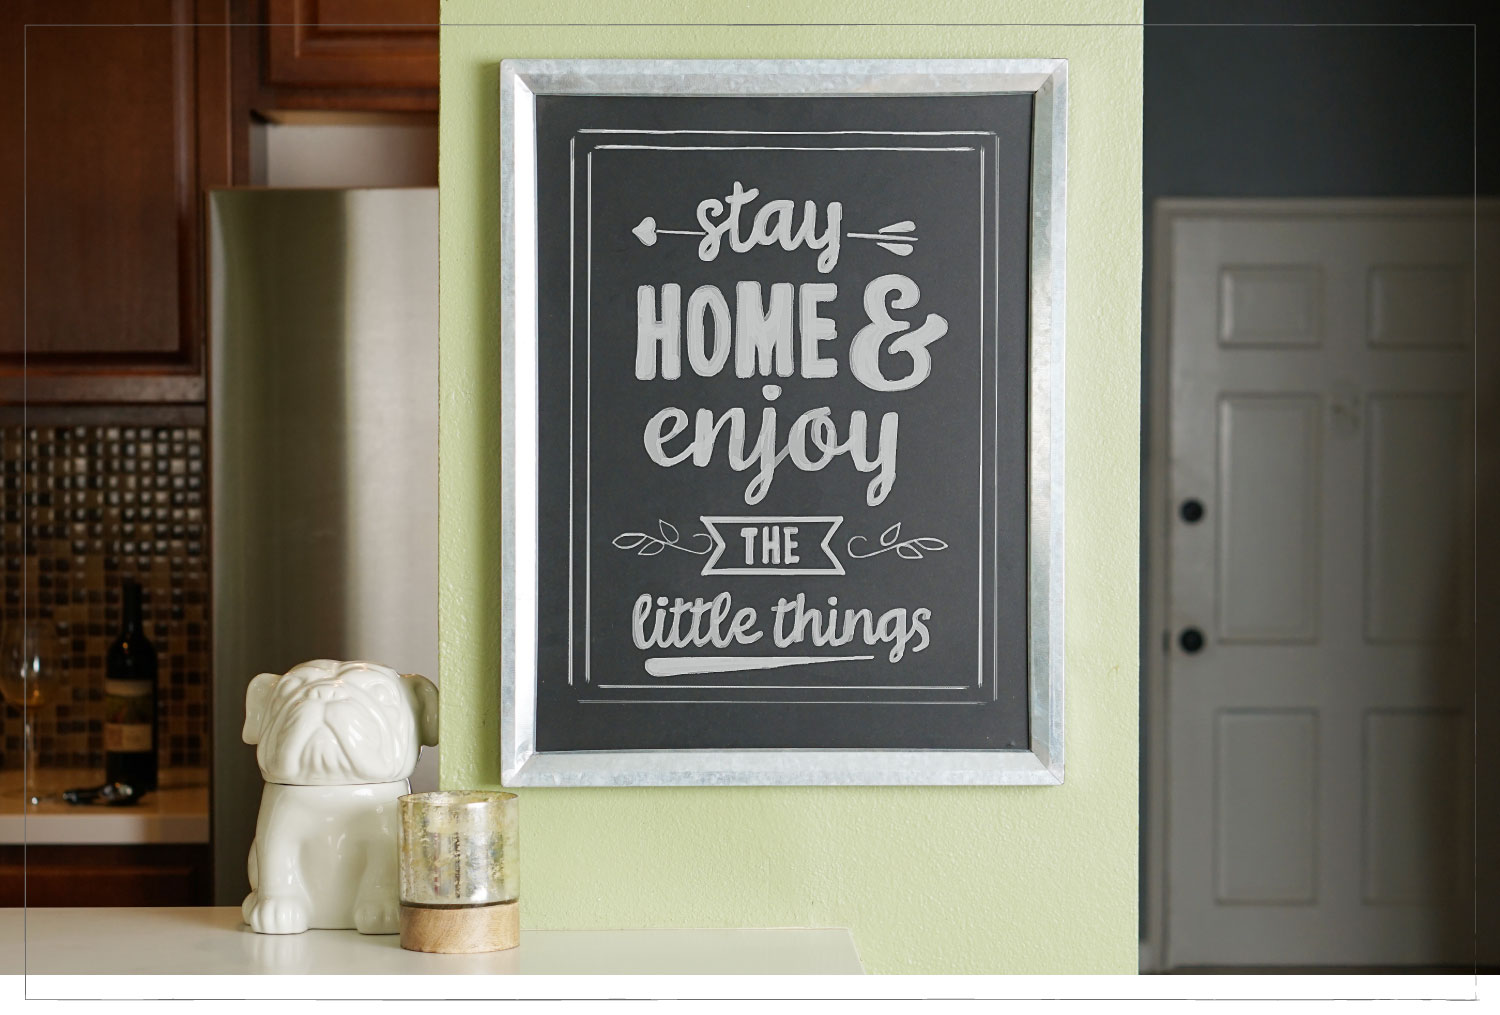 DIY Chalk Paint: Stress Free Summer Activity for All Ages /// By Faith Provencher of Design Fixation with Julia Morrissey #chalkpaint #diy #home #chalkboard